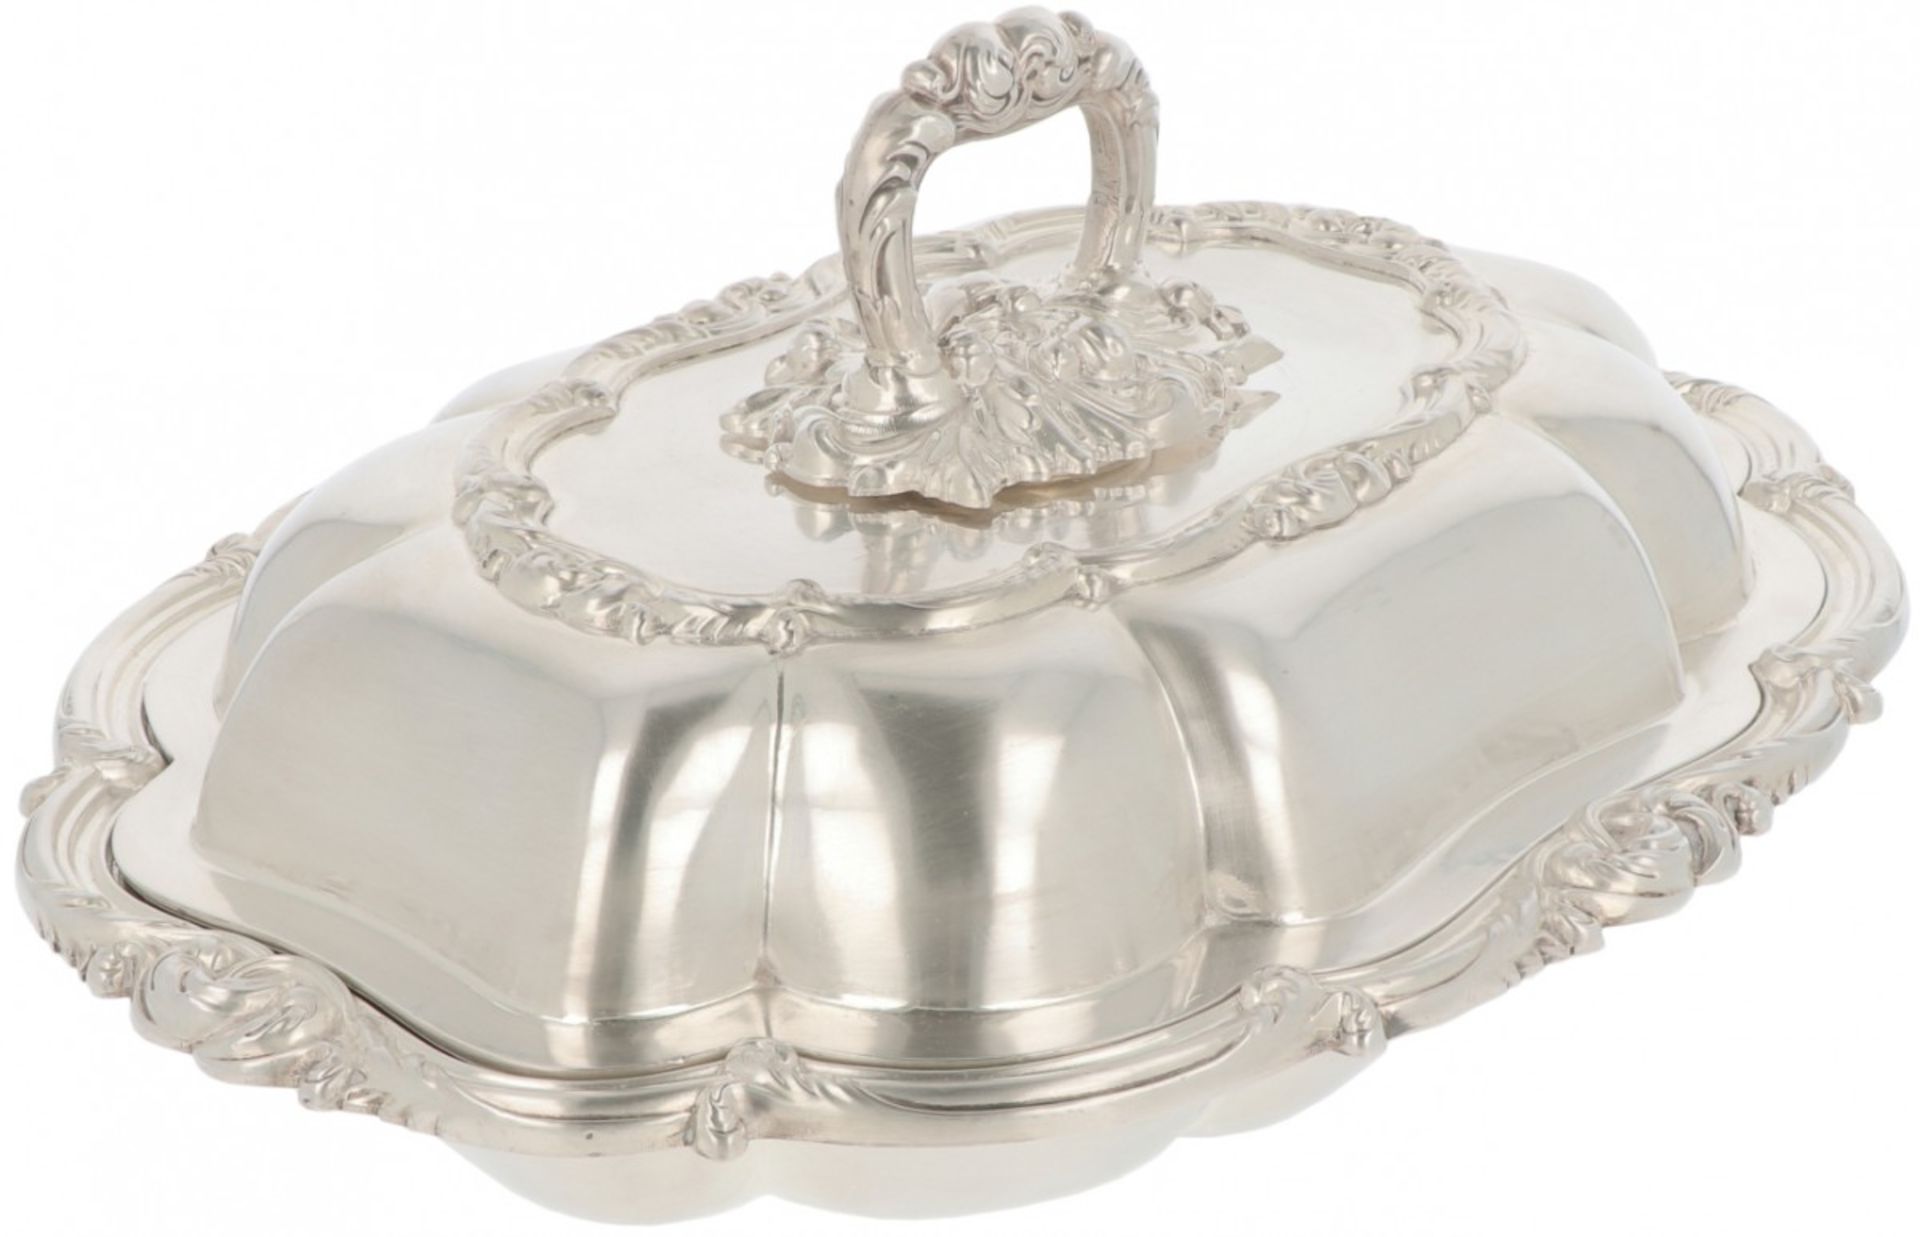 Silver-plated decking dish.